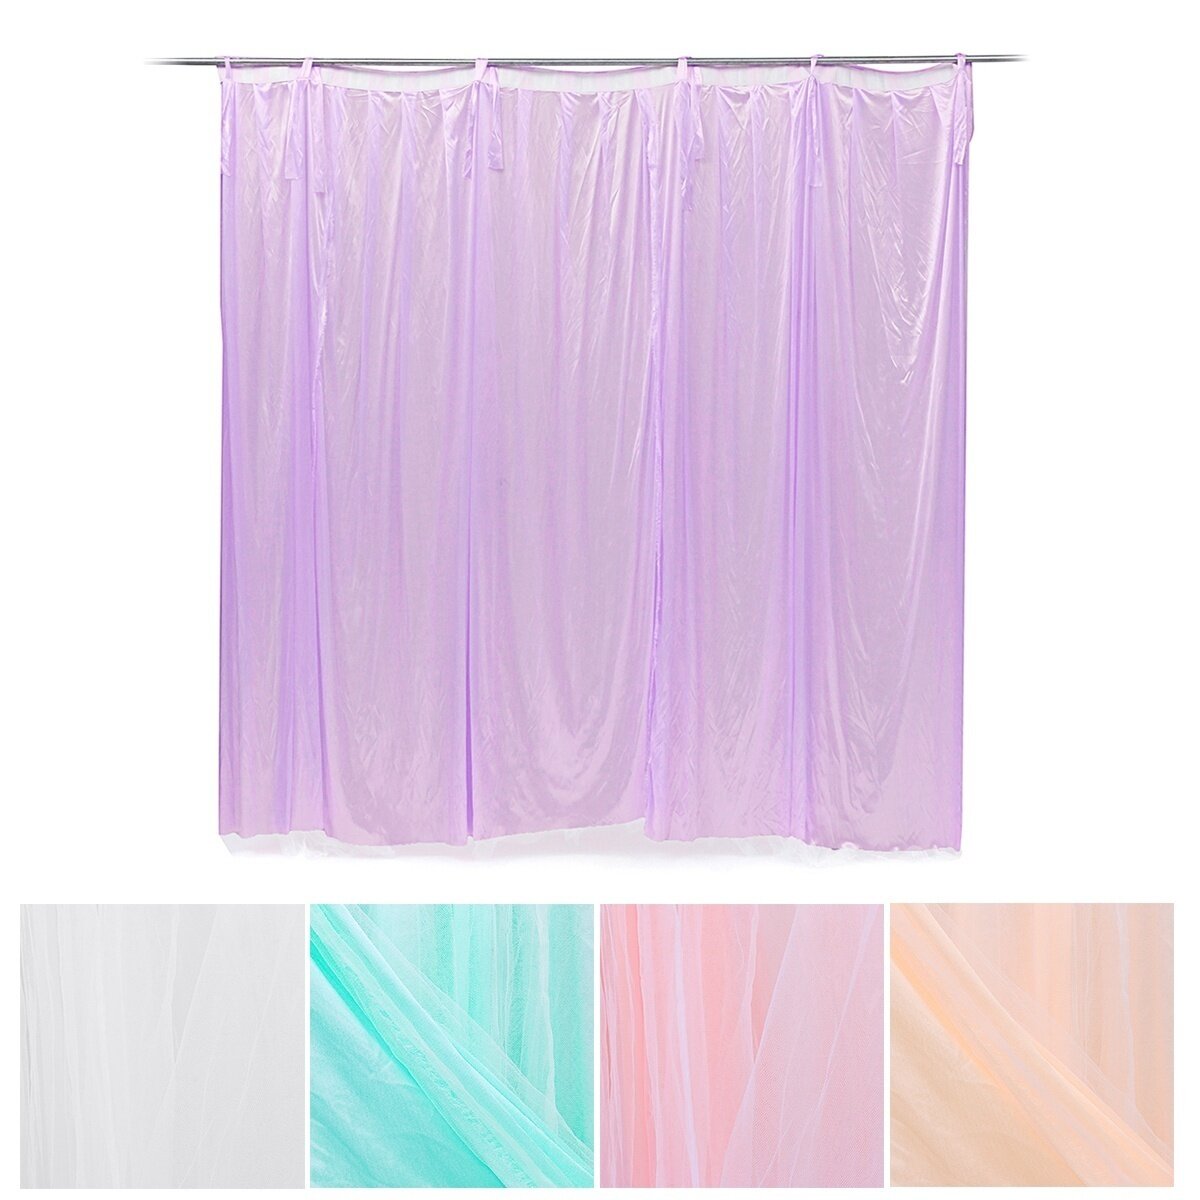 2X2m Wedding Backdrop Tulle Hanging Curtain Wedding Backdrop for Party Decor